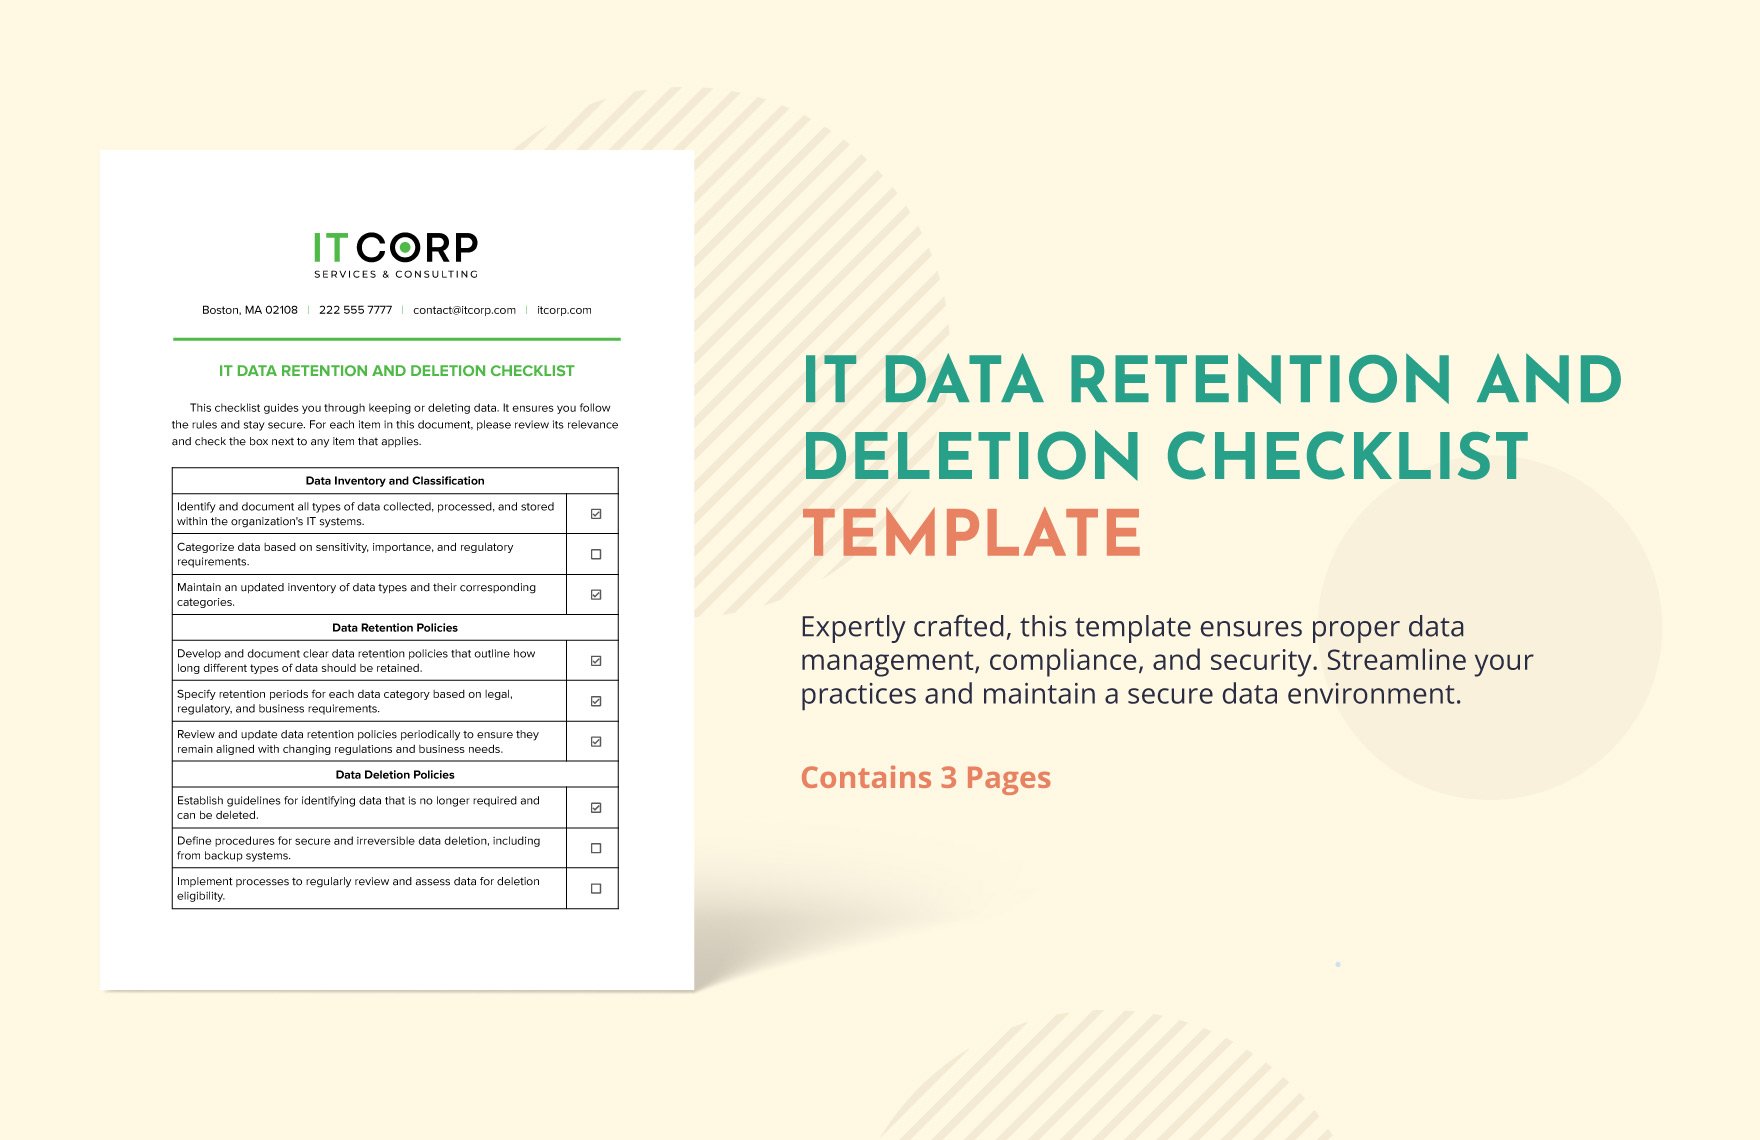 IT Data Retention and Deletion Checklist Template in Word, Google Docs, PDF